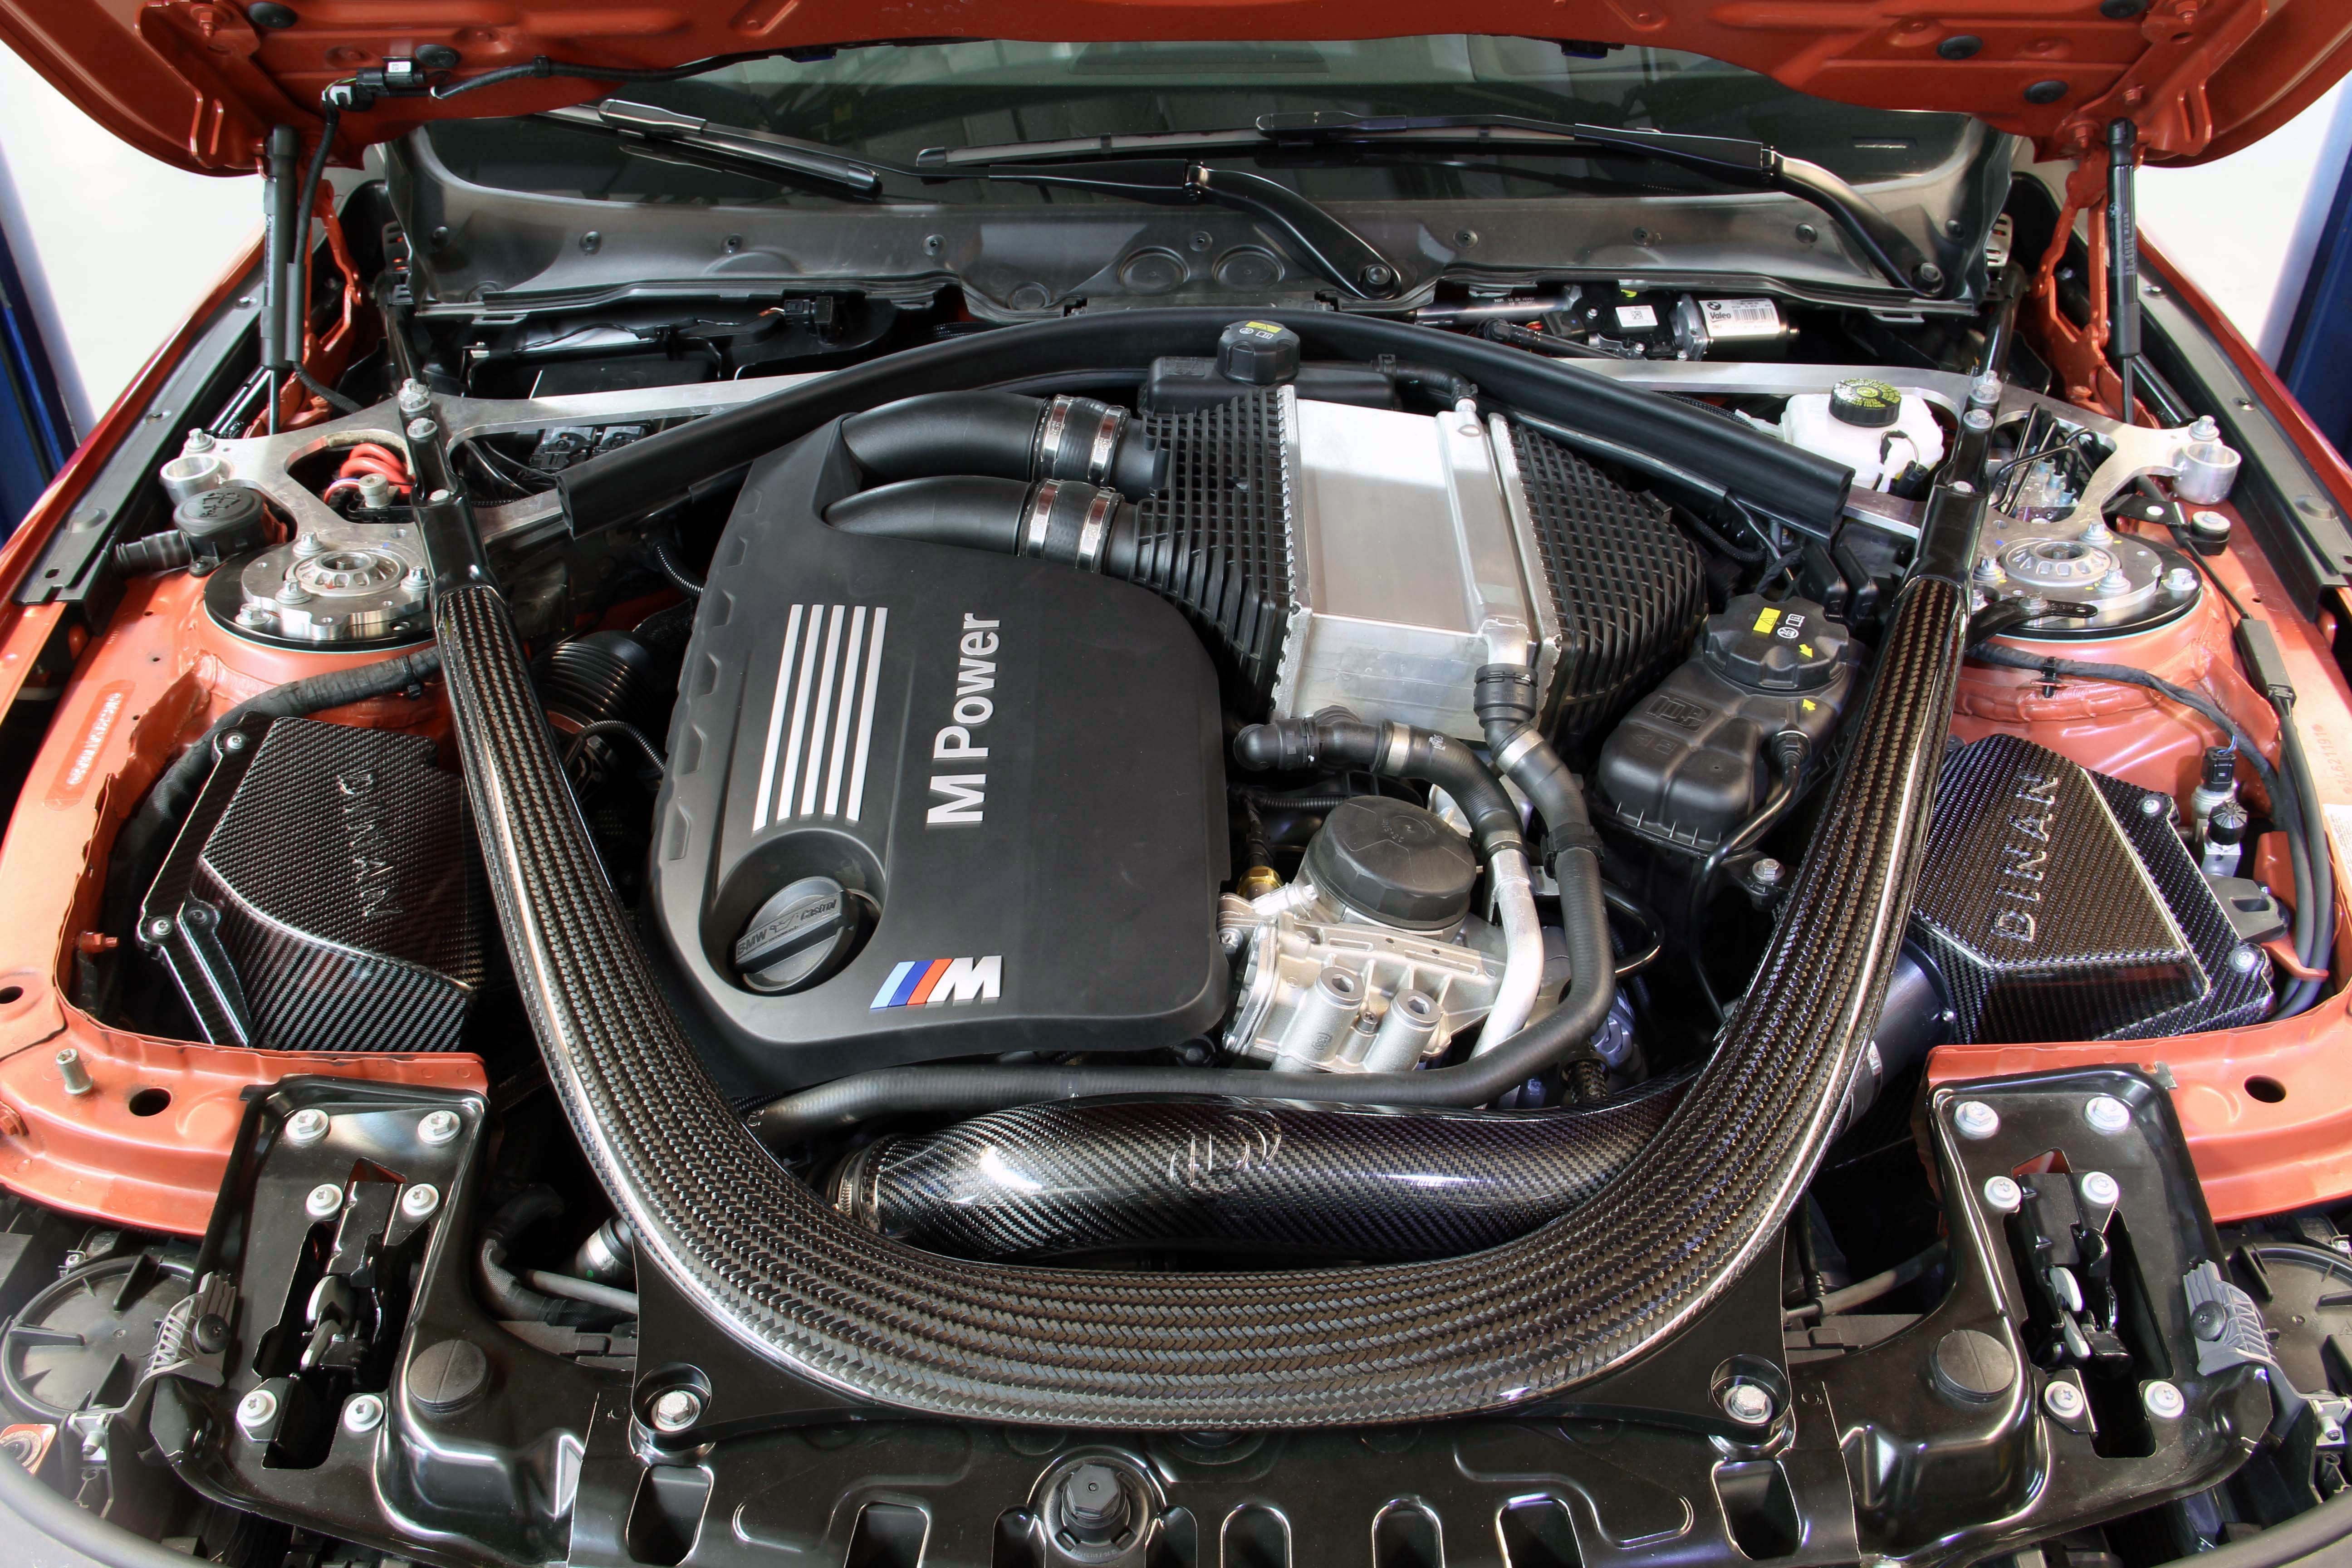 BMW M3/M4 Stage 2 Kit from Dinan Brings 530 HP and 683 Nm to the Table